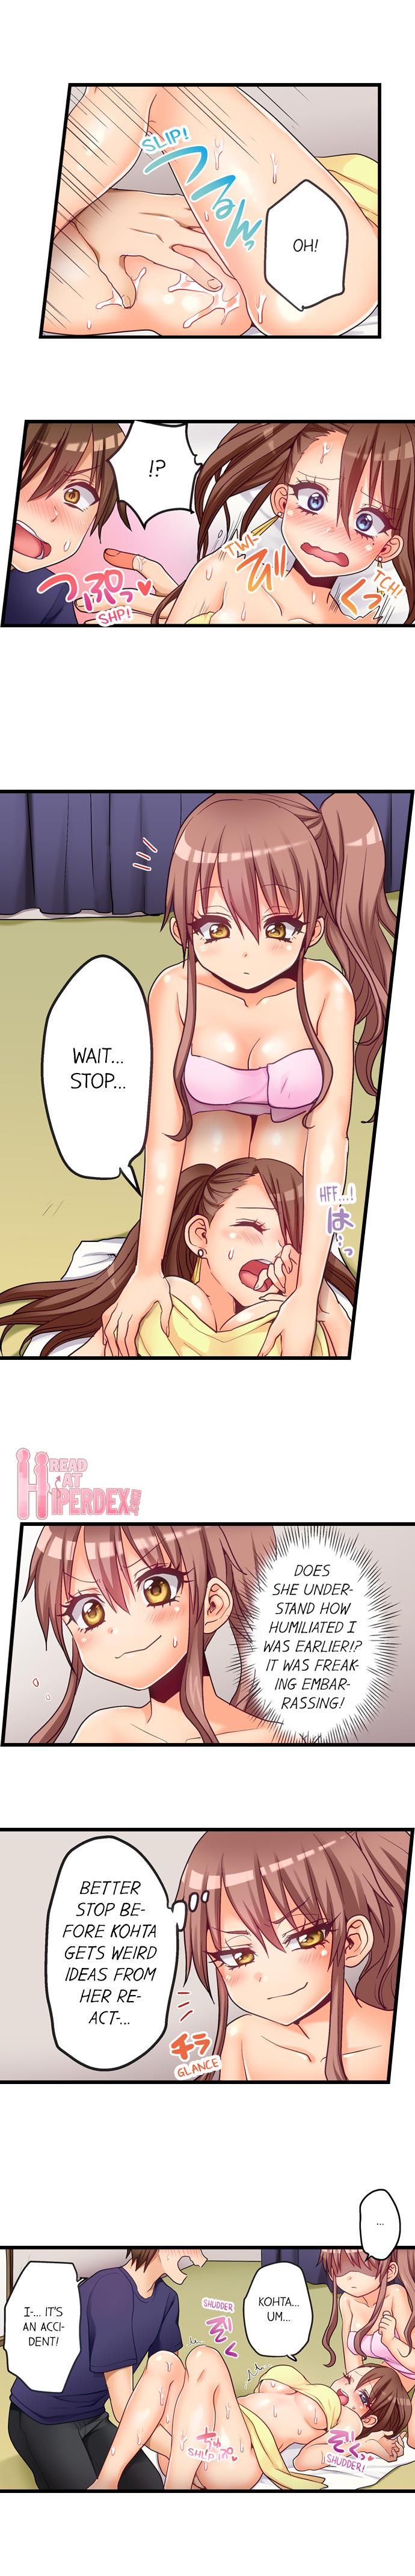 Bulge Porori] My First Time is with.... My Little Sister?! - Original Double Penetration - Page 9